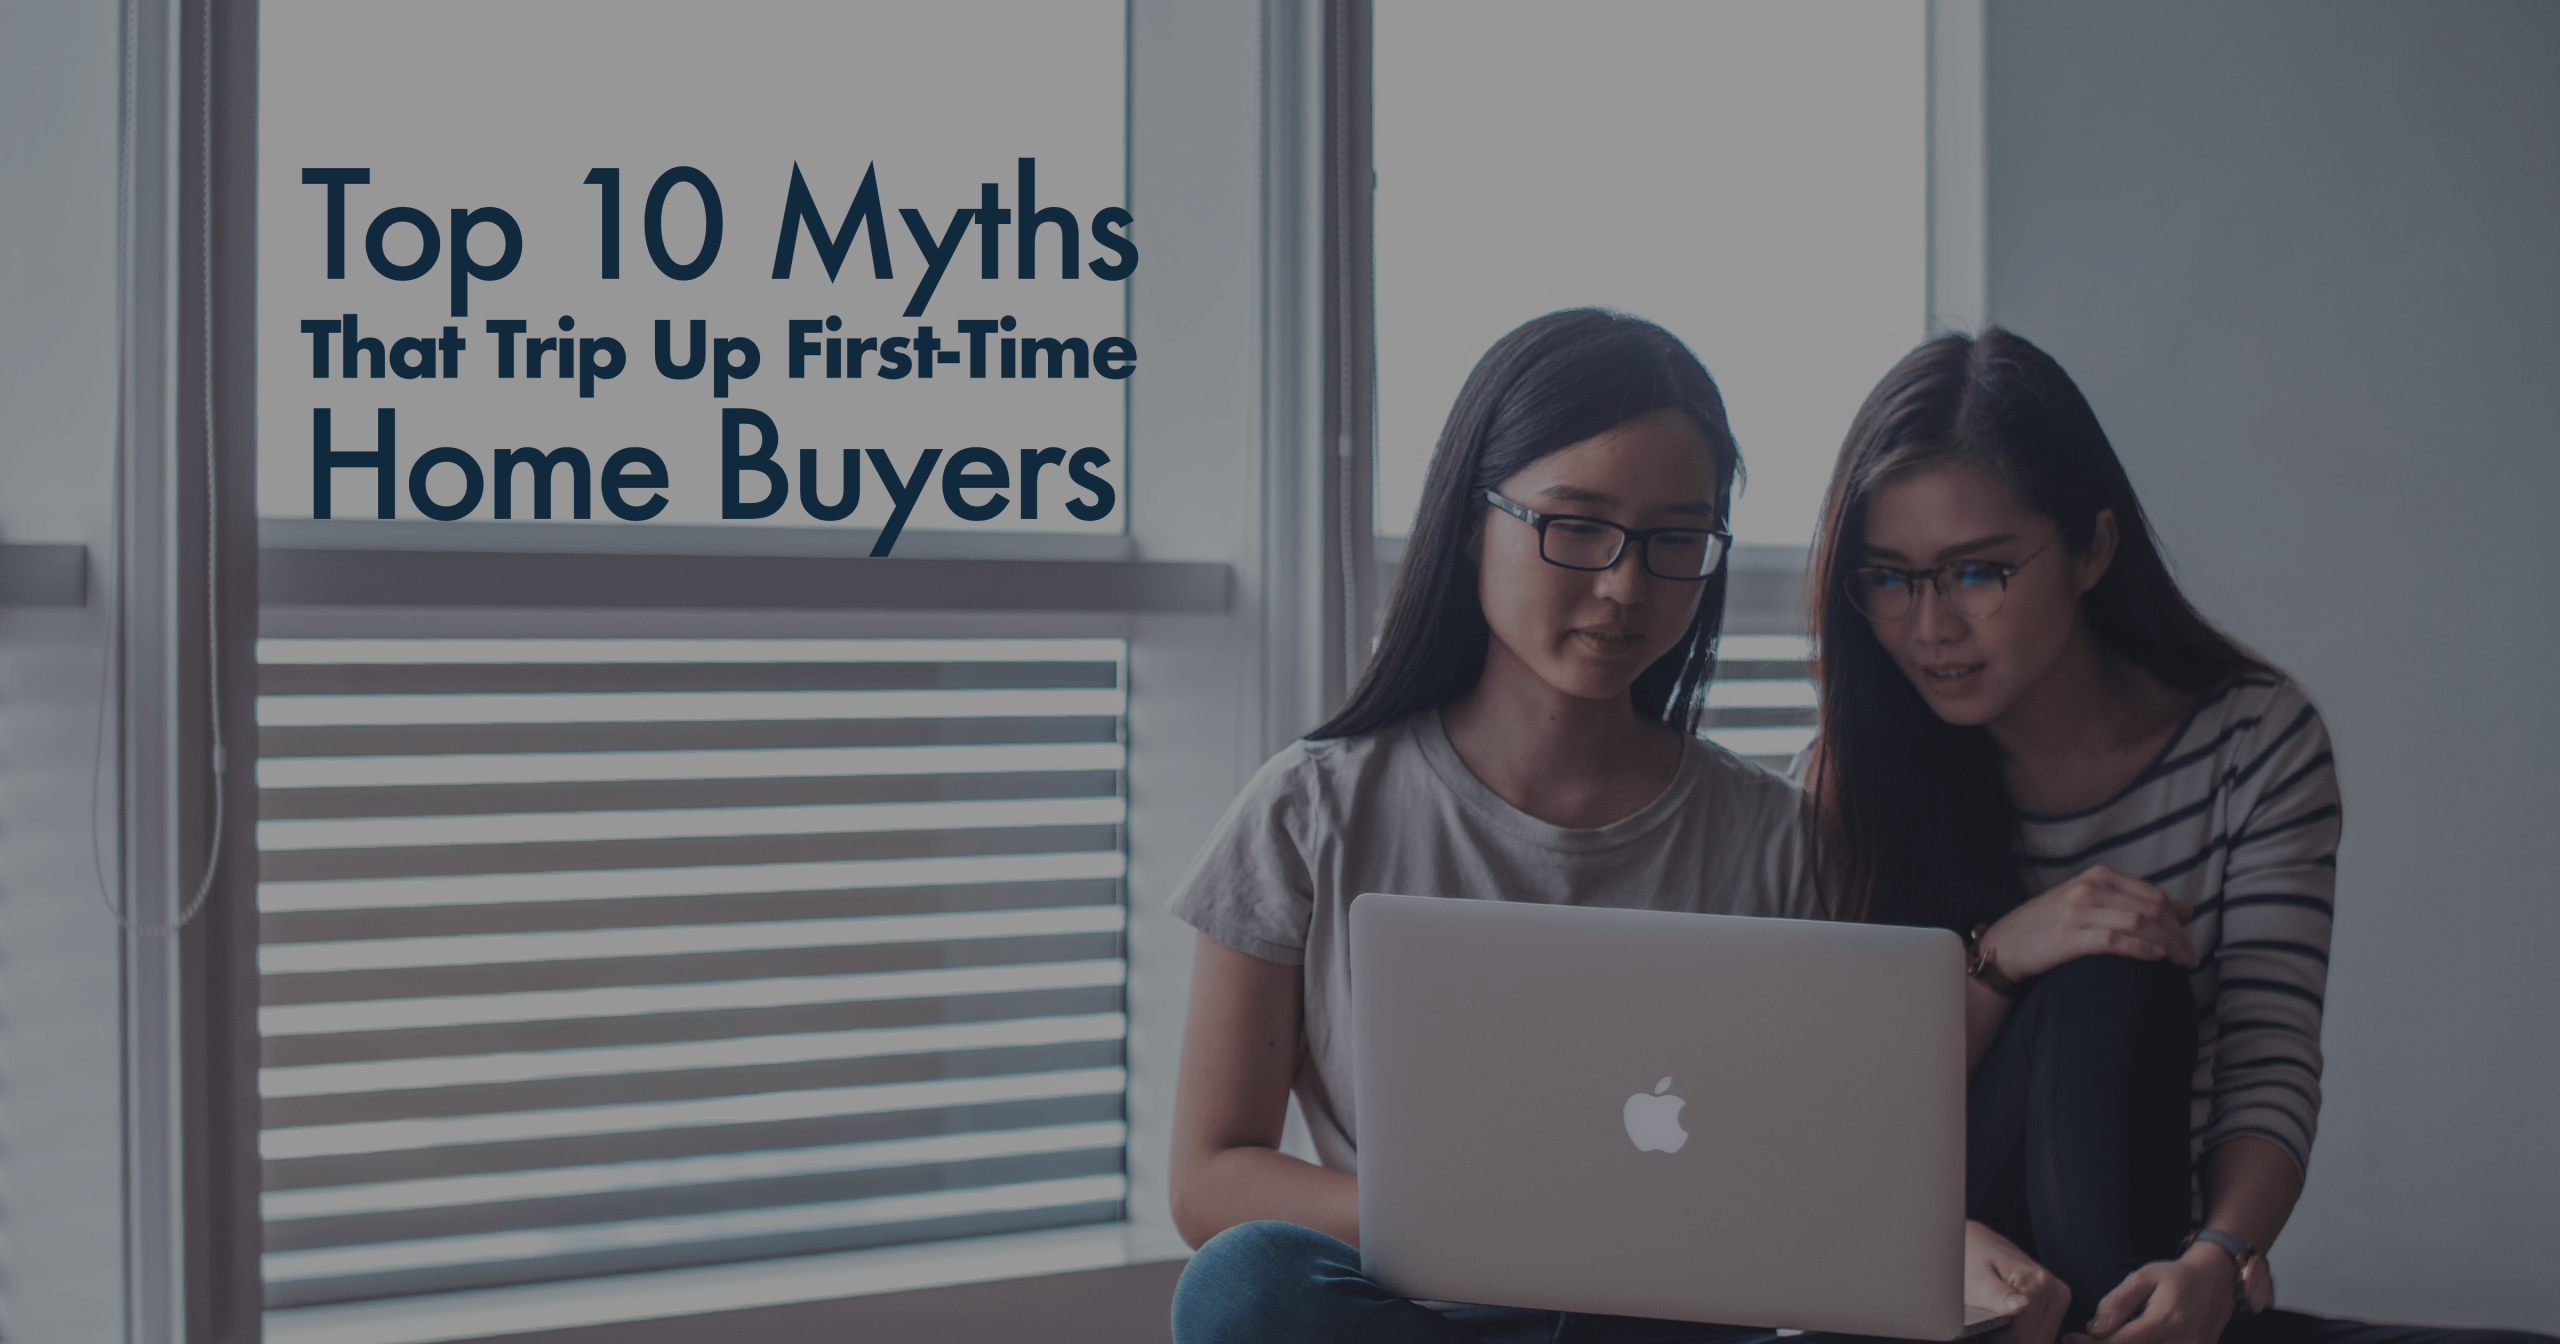 Top 10 Myths That Trip Up First-Time homebuyers